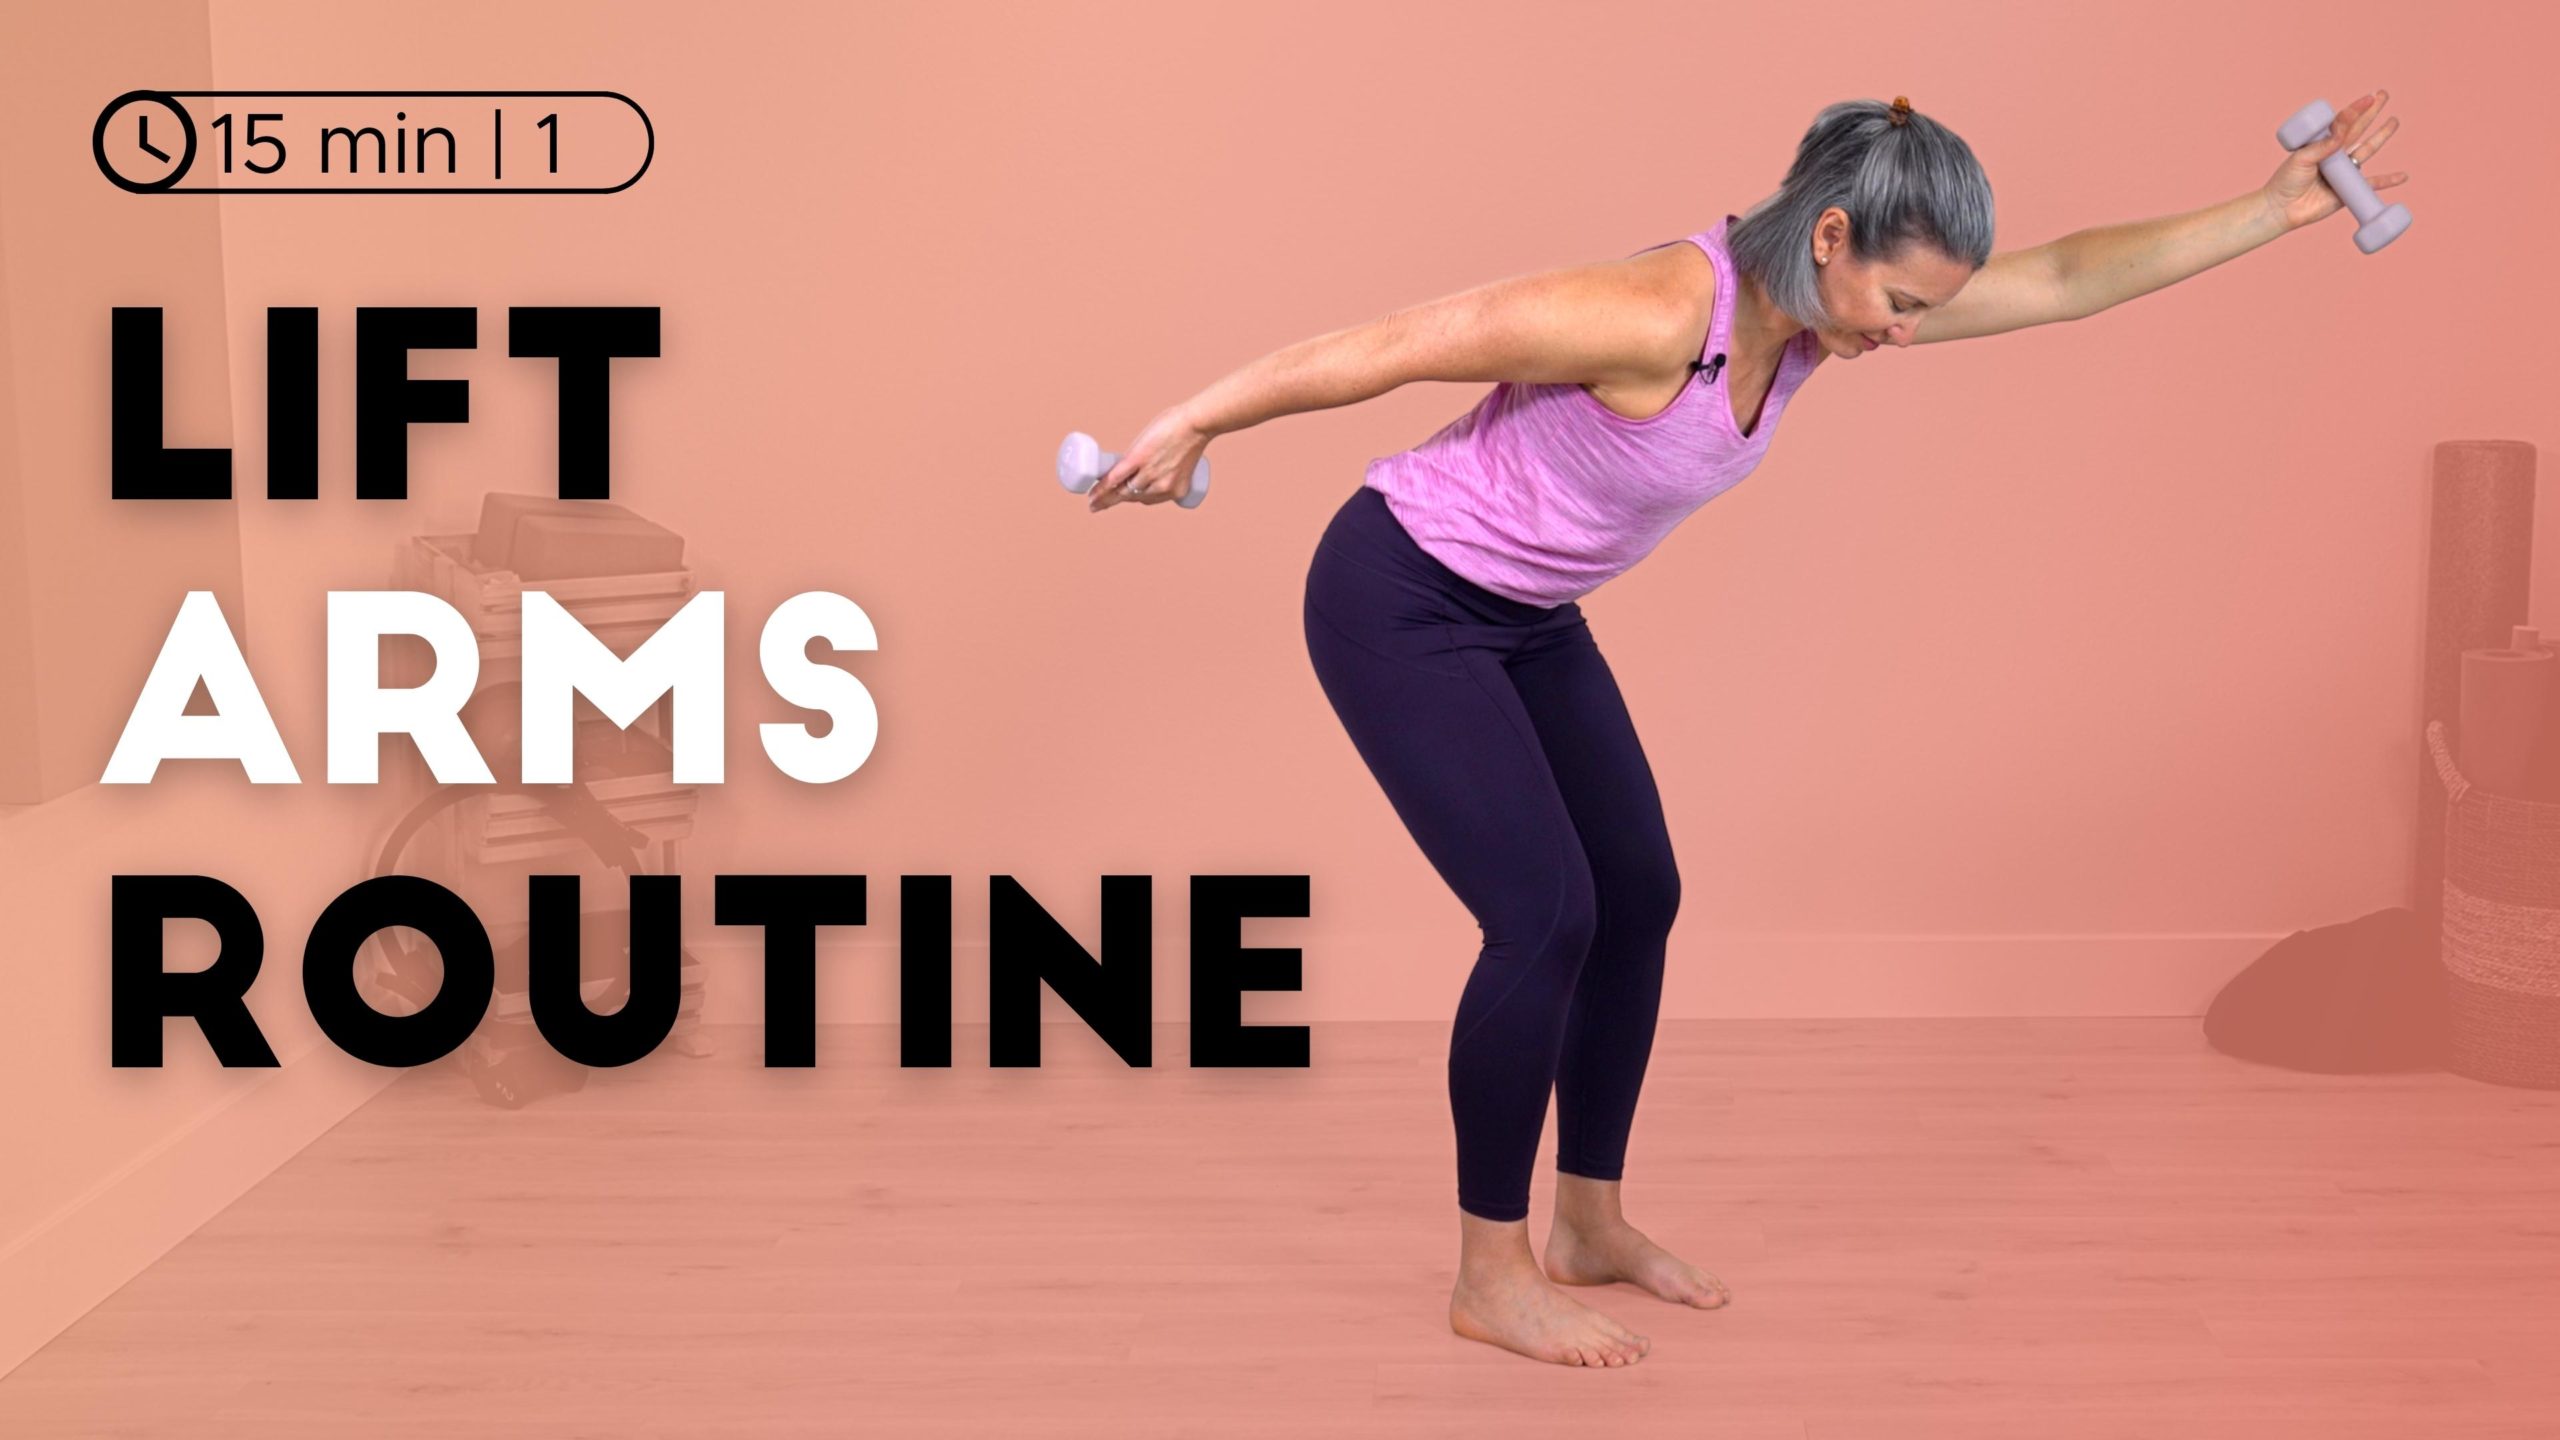 Lift Arms Routine